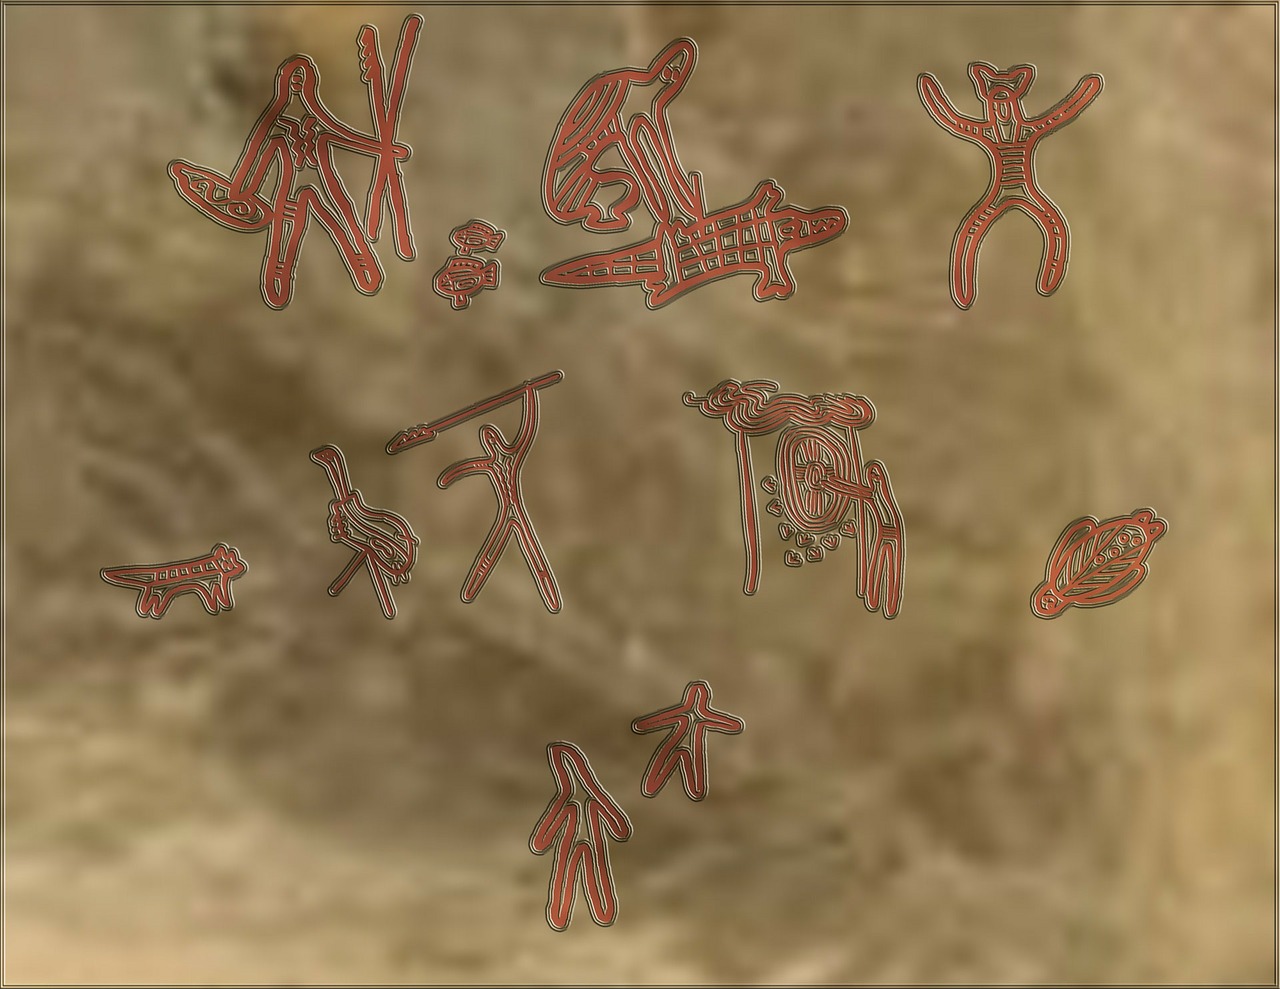 a bunch of drawings that are on a piece of paper, a cave painting, stylized thin lines, himba, depicted as a 3 d render, acrobatic moveset